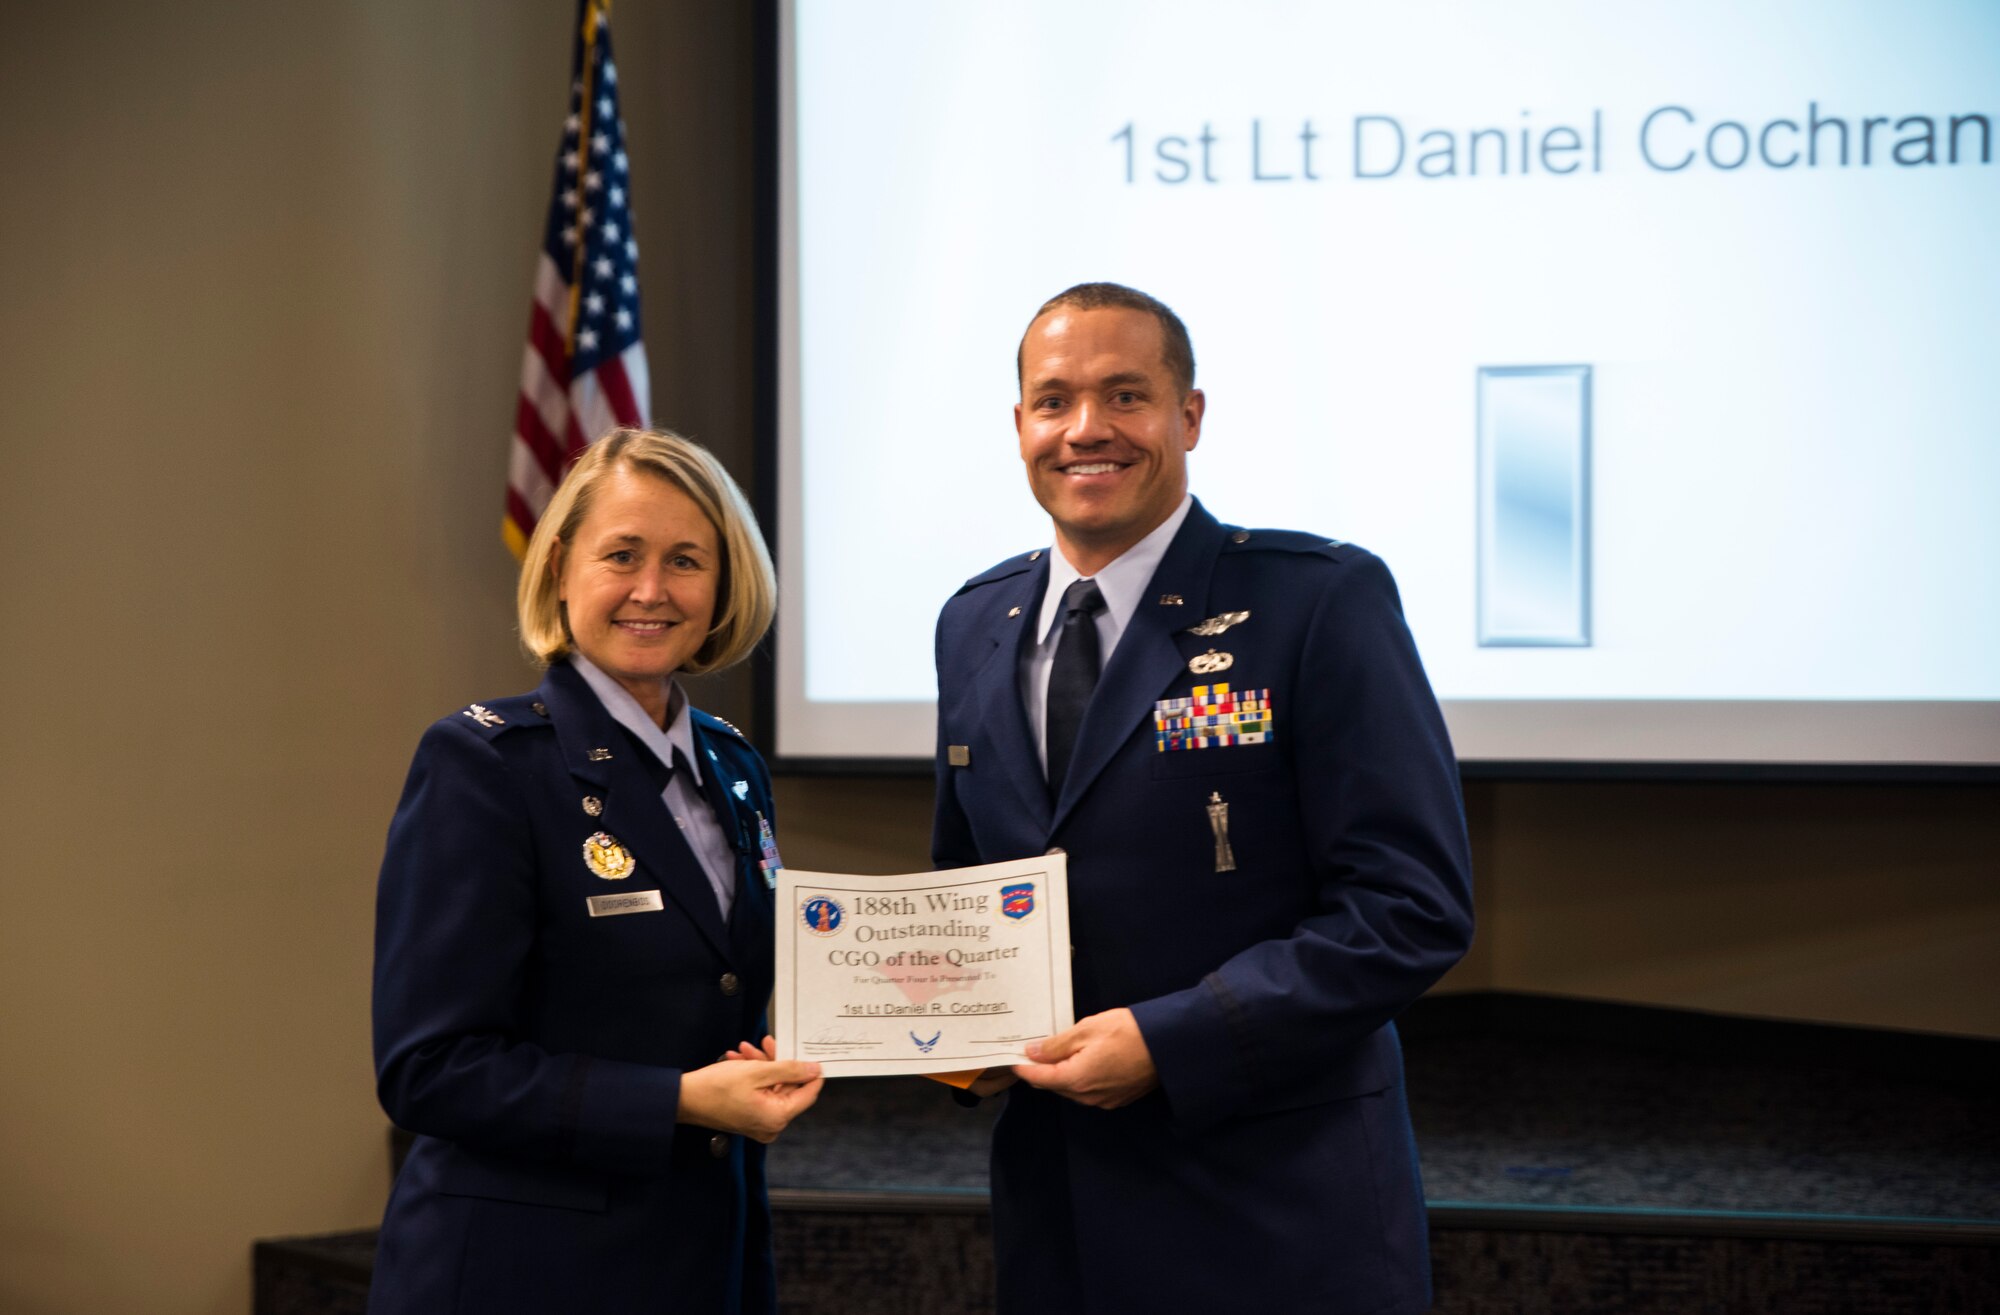 1st Lt. Daniel Cochran, 184th Attack Squadron, is awarded the Outstanding Company Grade Officer of the Quarter award Nov. 5, 2016, for the final quarter of fiscal year 2016 at Ebbing Air National Guard Base, Fort Smith, Ark. The Outstanding Airman of the Quarter program promotes professional development, innovation and mission success by recognizing those who excel in their carrier fields while fostering the cultivation of ready, responsive and highly-skilled Airman. The award was presented to Cochran by Col. Bobbi Doorenbos, 188th Wing commander. (U.S. Air National Guard photo by Senior Airman Cody Martin)